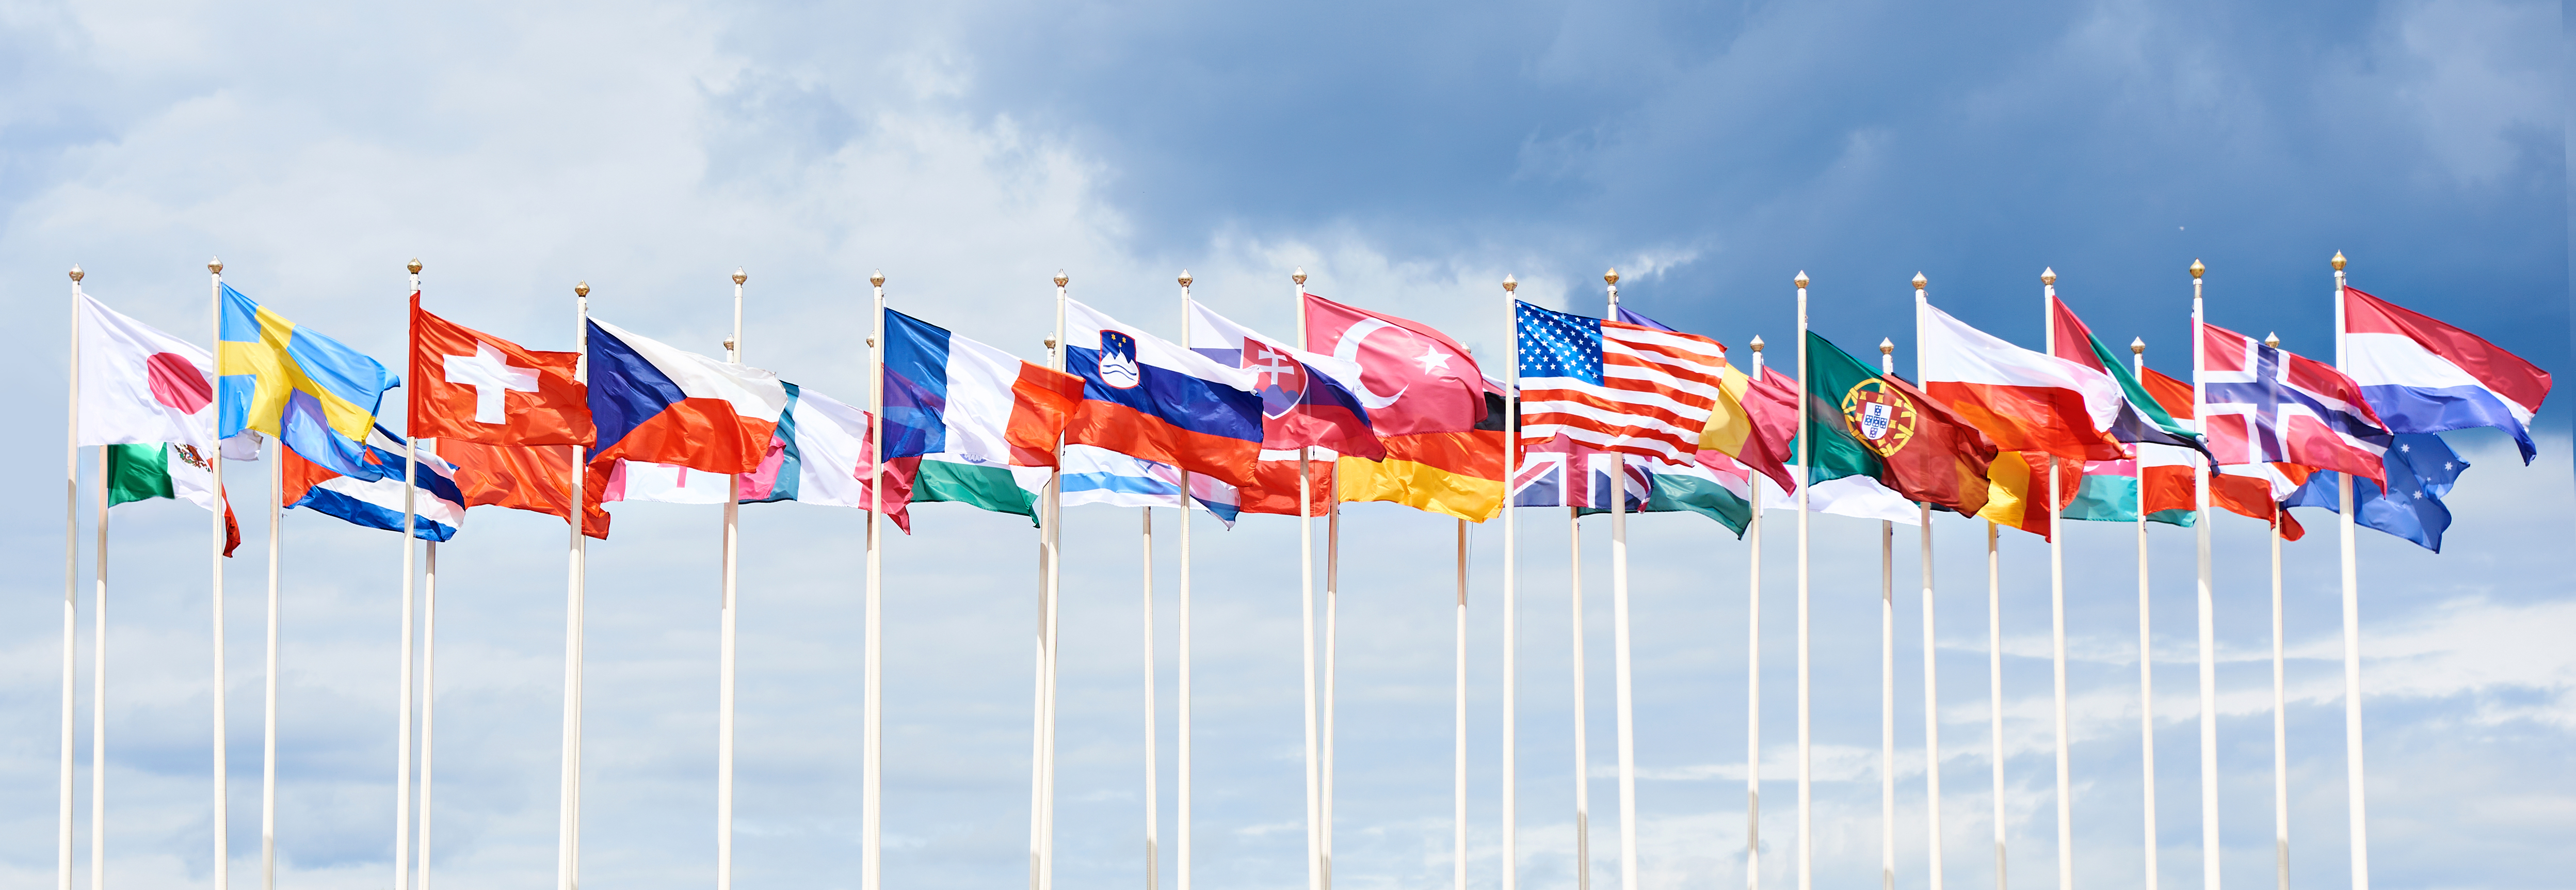 Flags of various countries on high flagpoles